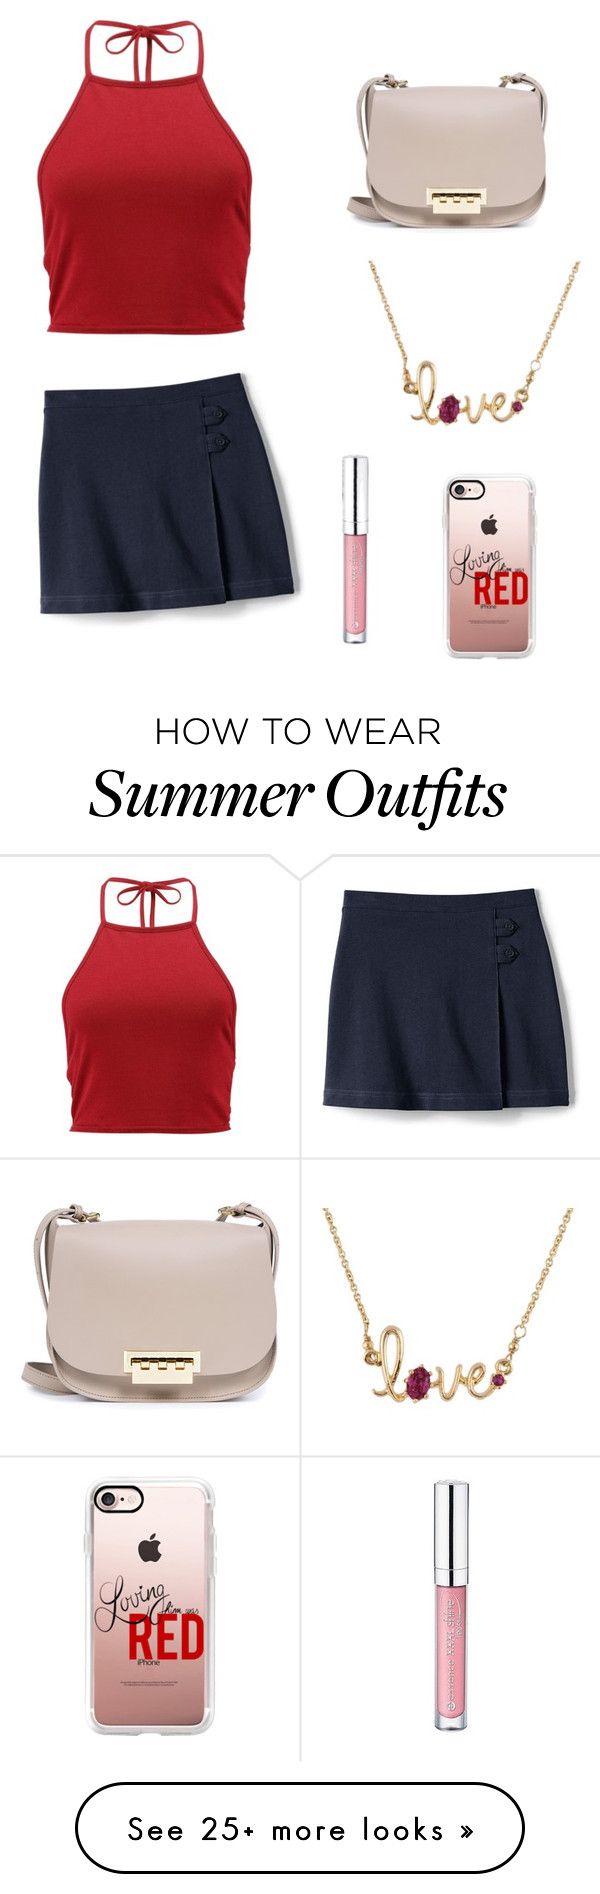 "Cute Summer Outfit" by lsantana13 on Polyvore featuring Boohoo, ZAC Z...